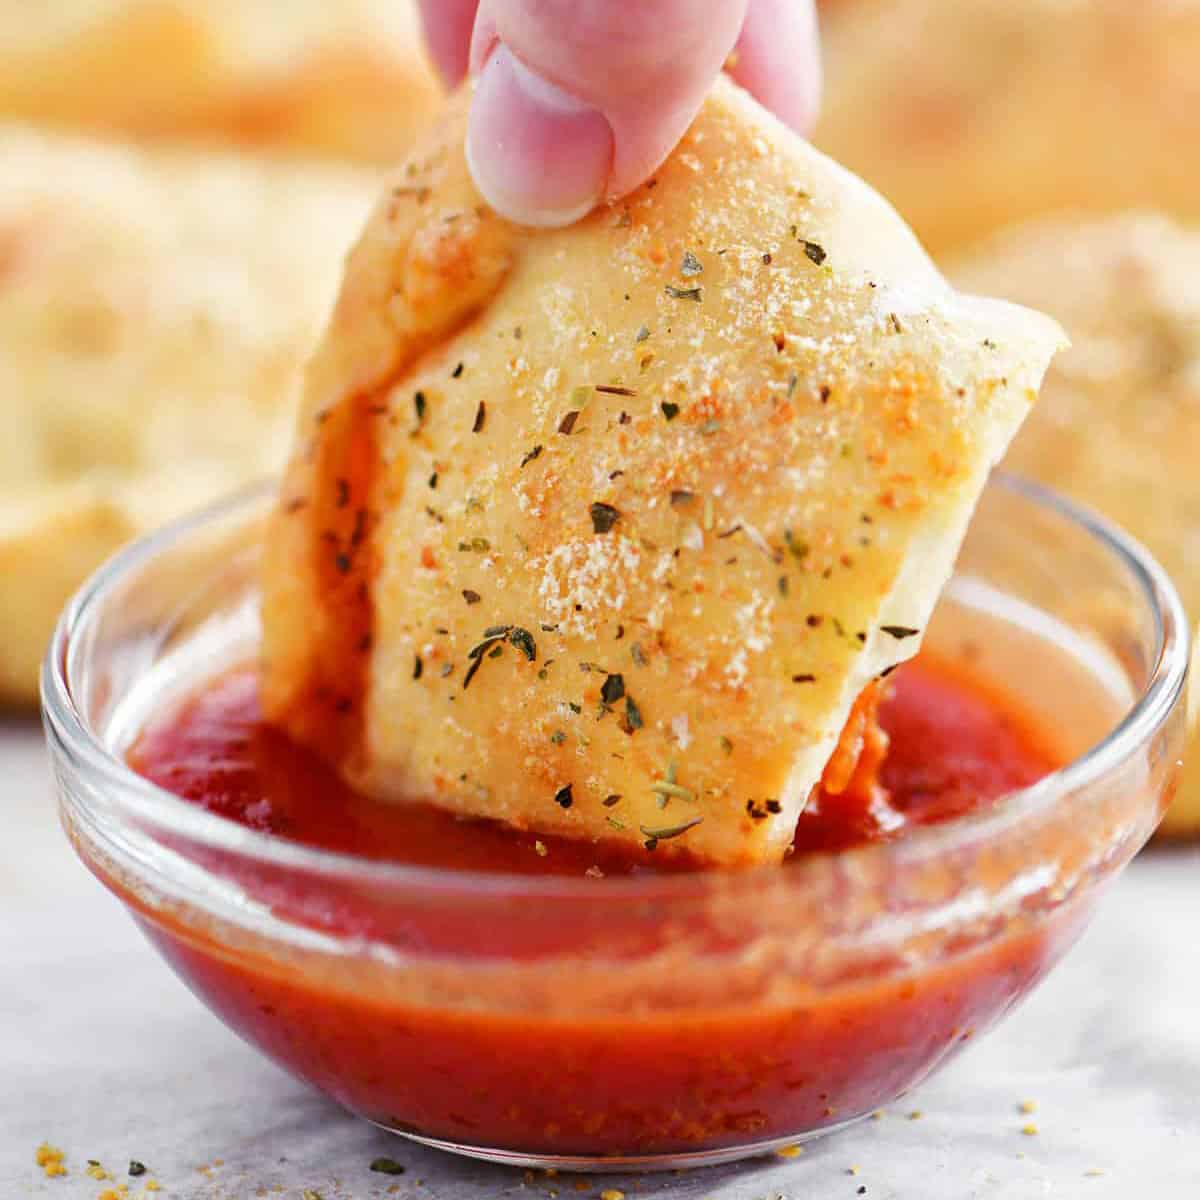 a hand dipping a calzone into pizza sauce.